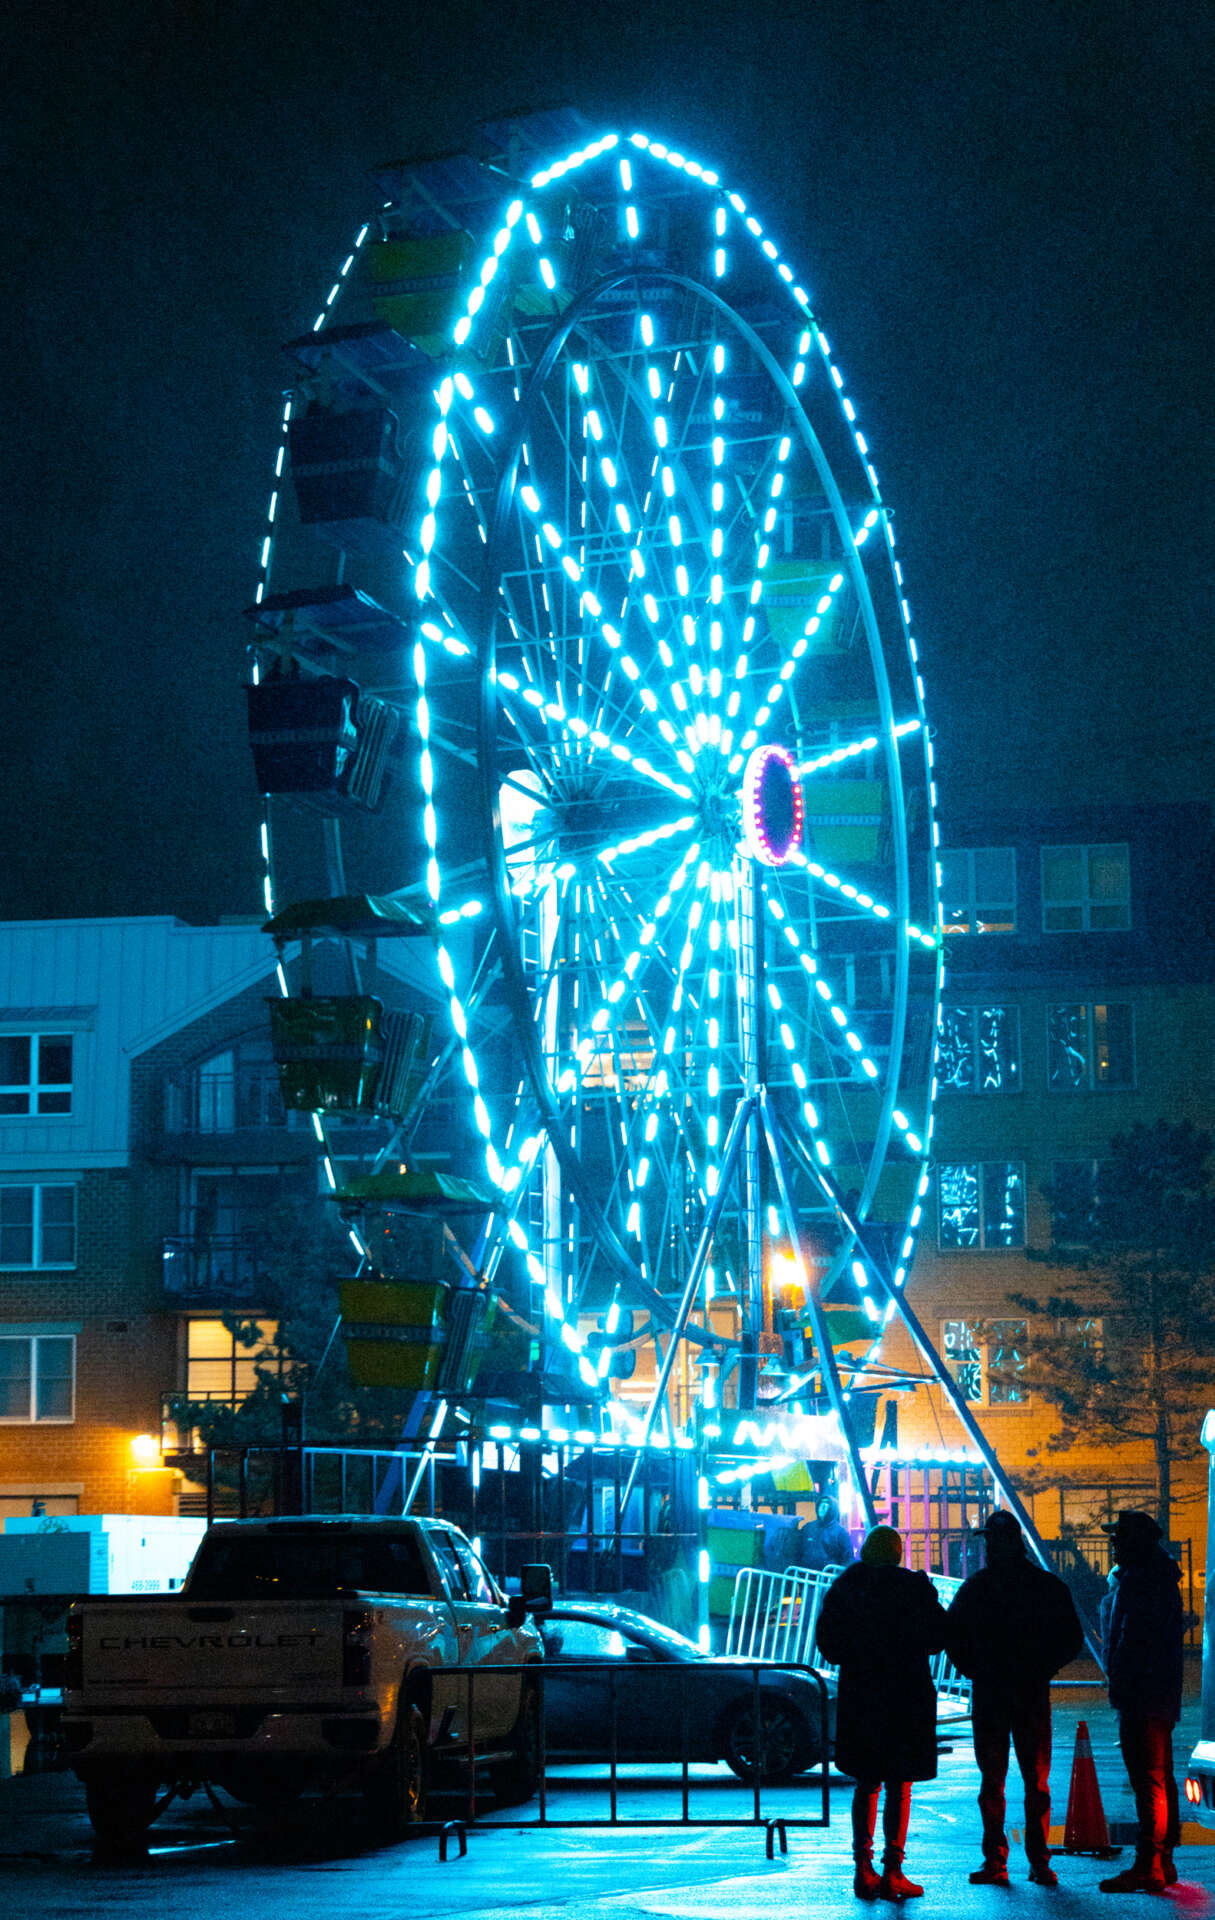 People looking at lighted ferris wheel at night